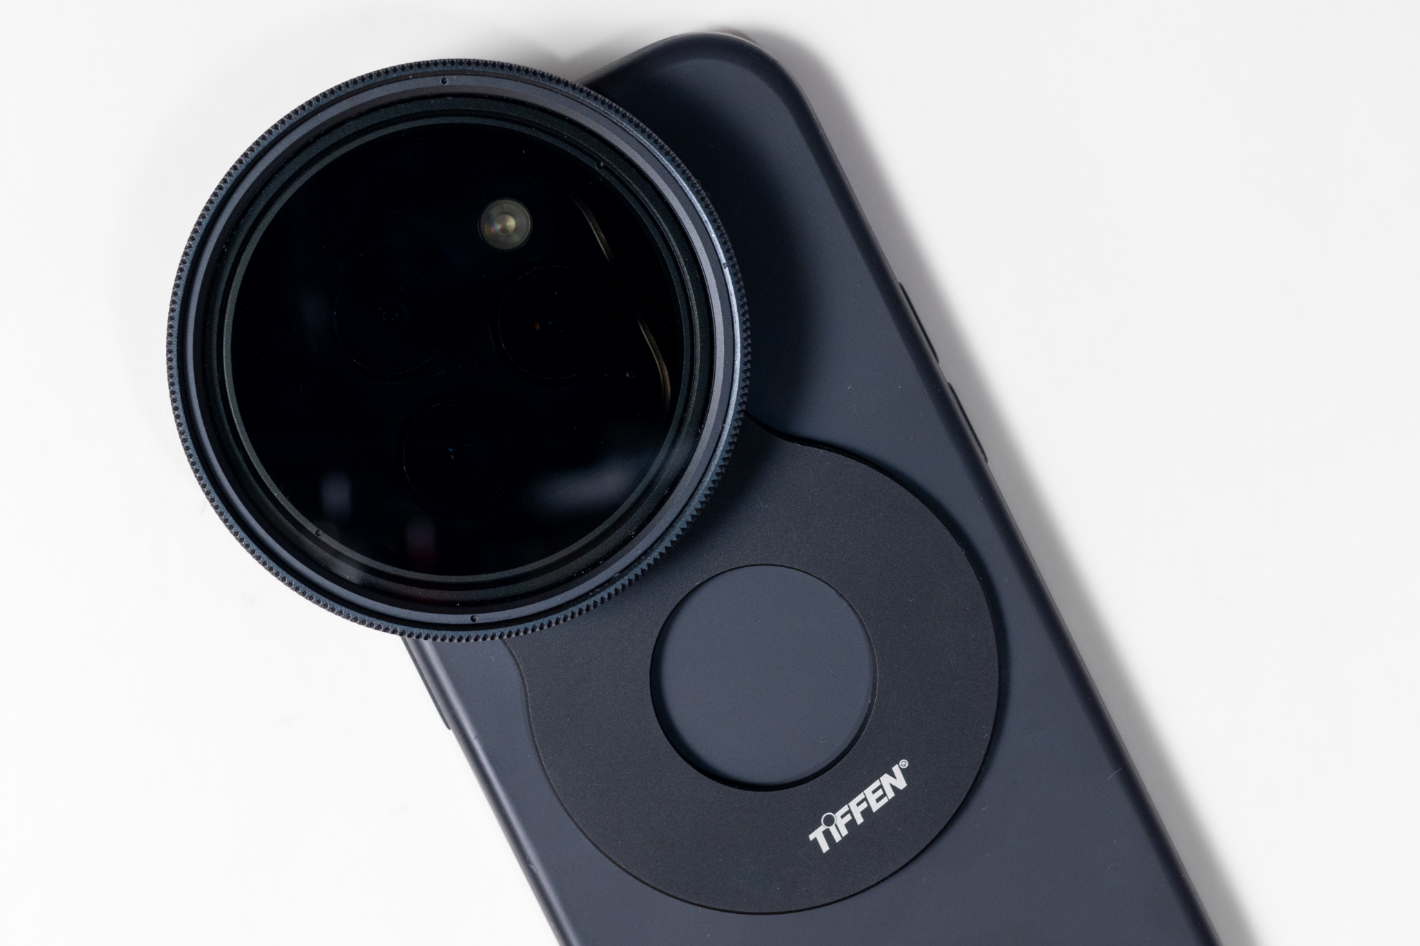 New Tiffen smartphone 58mm filter mount for iPhone